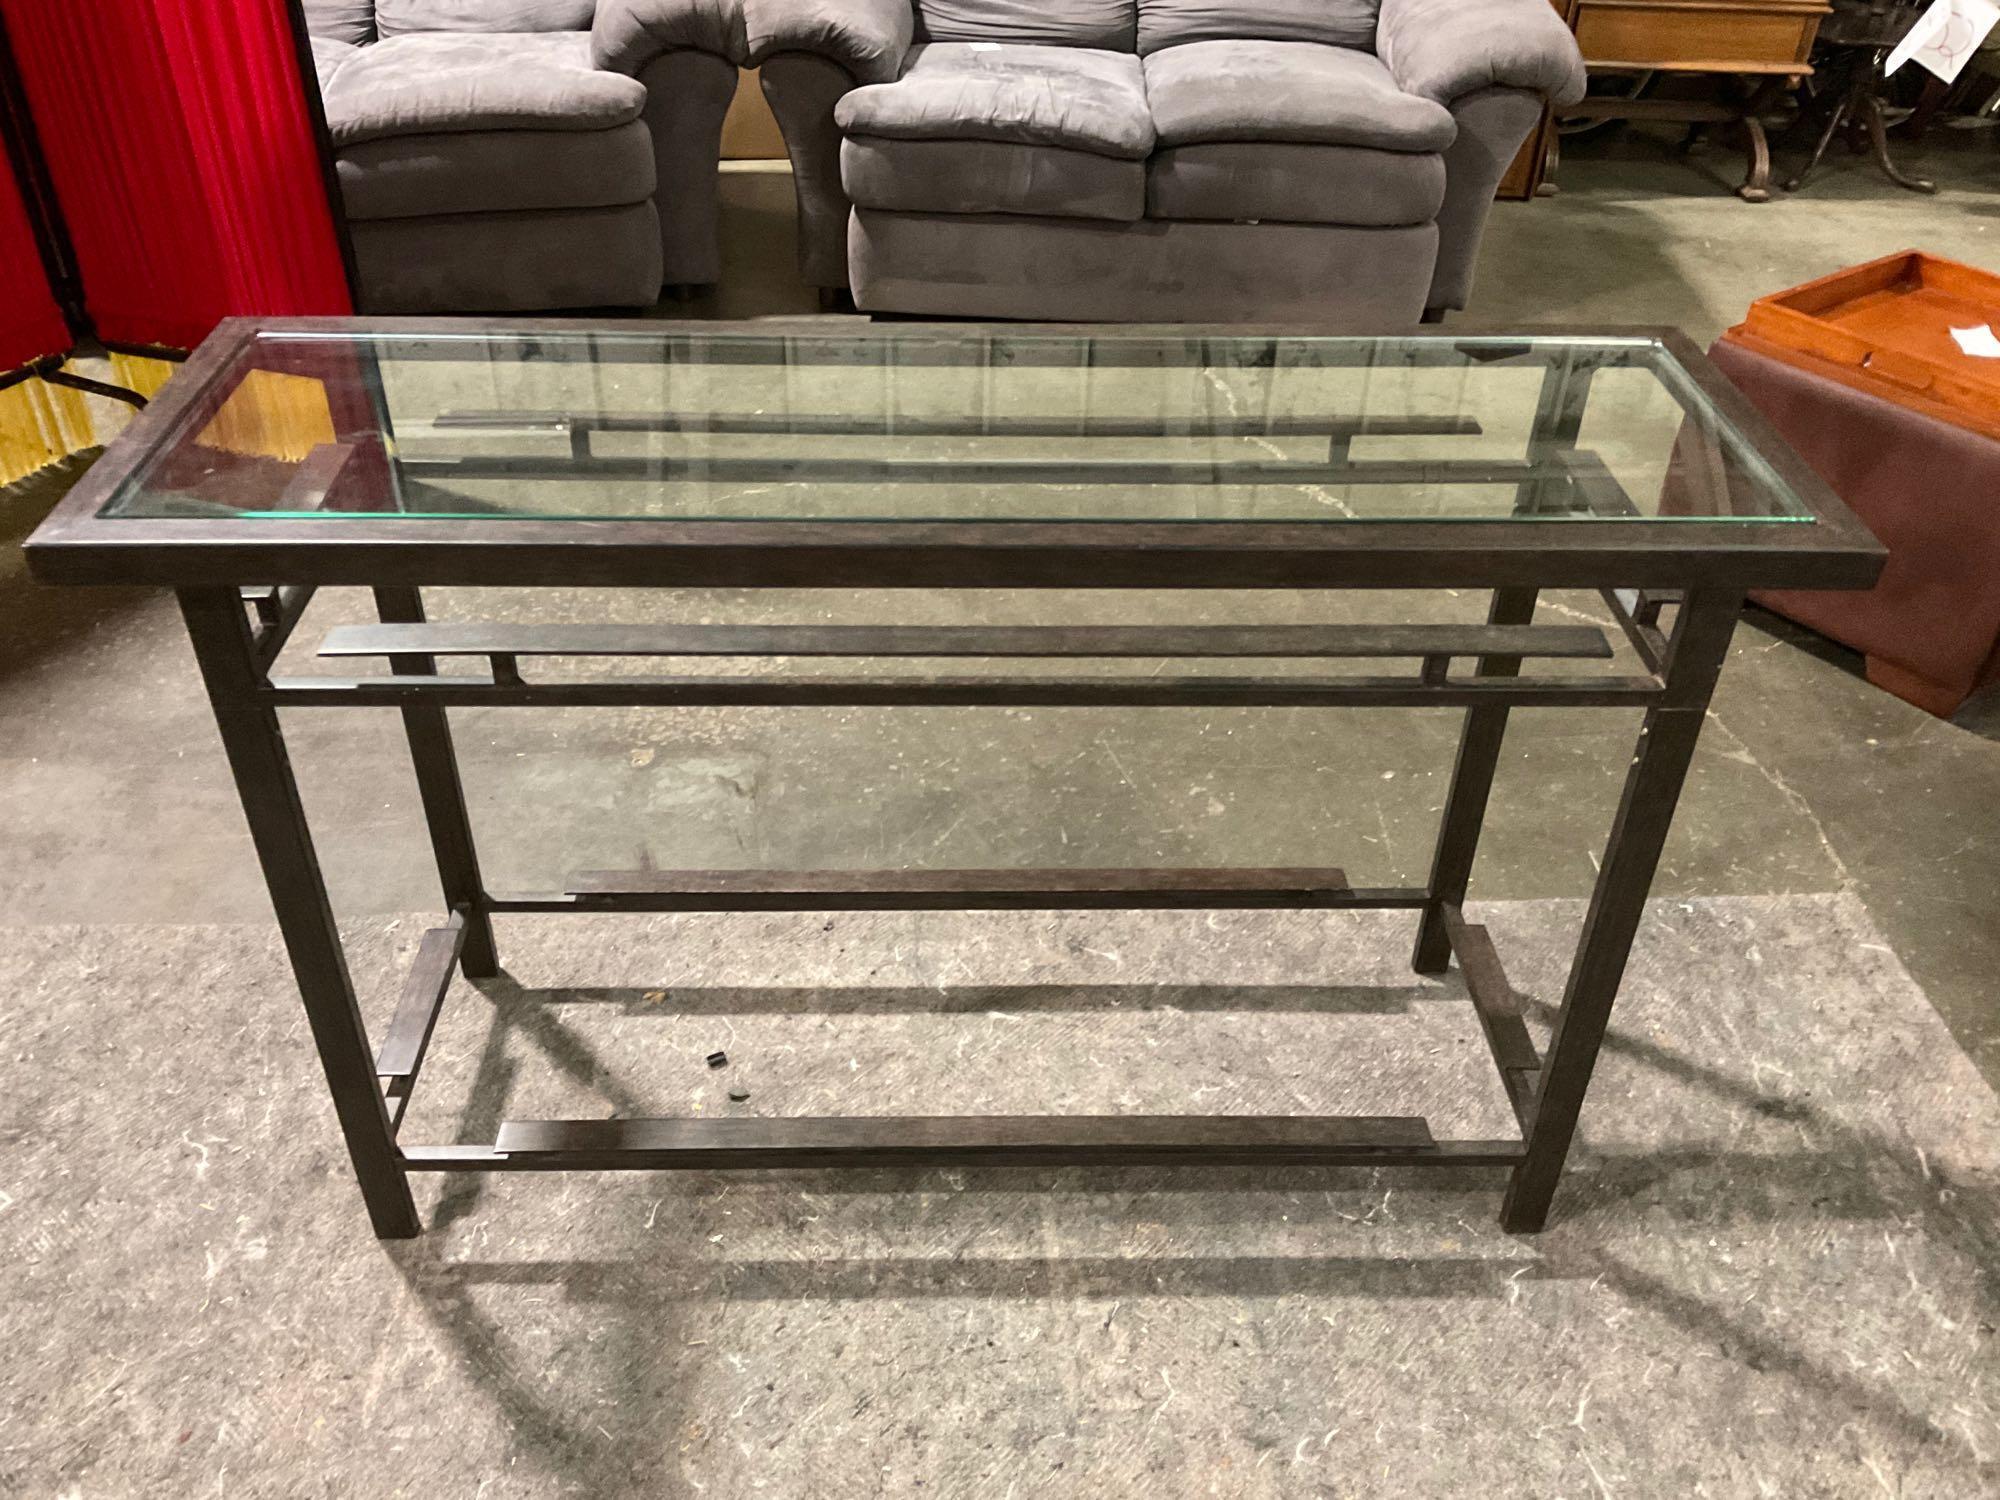 Very attractive and modern dark brown brushed metal hallway or sofa table w/ glass top